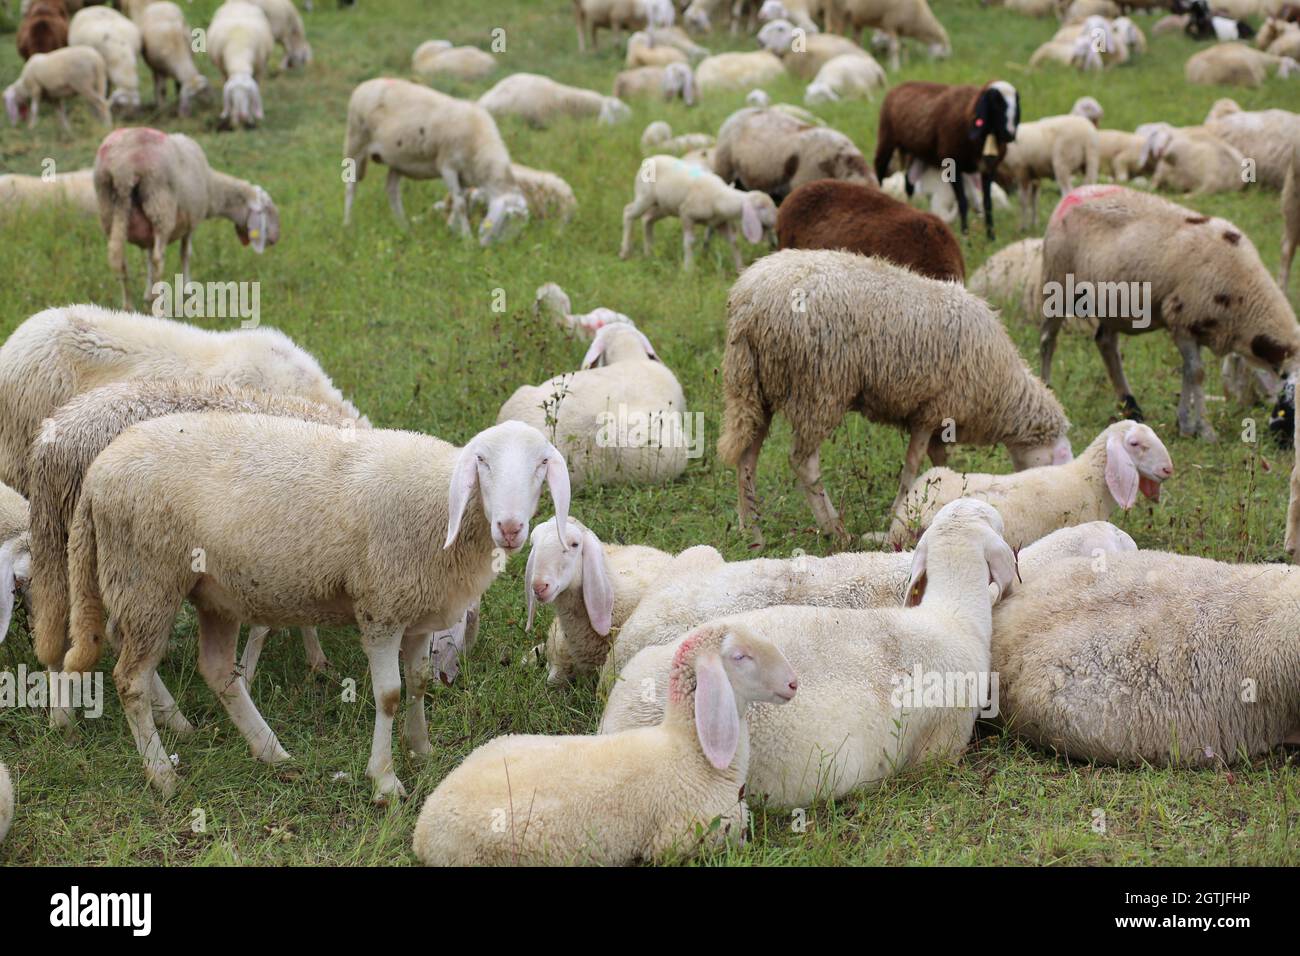 Flock With So Many White Sheep With Lambs Grazing In The High Mountain Meadow Stock Photo